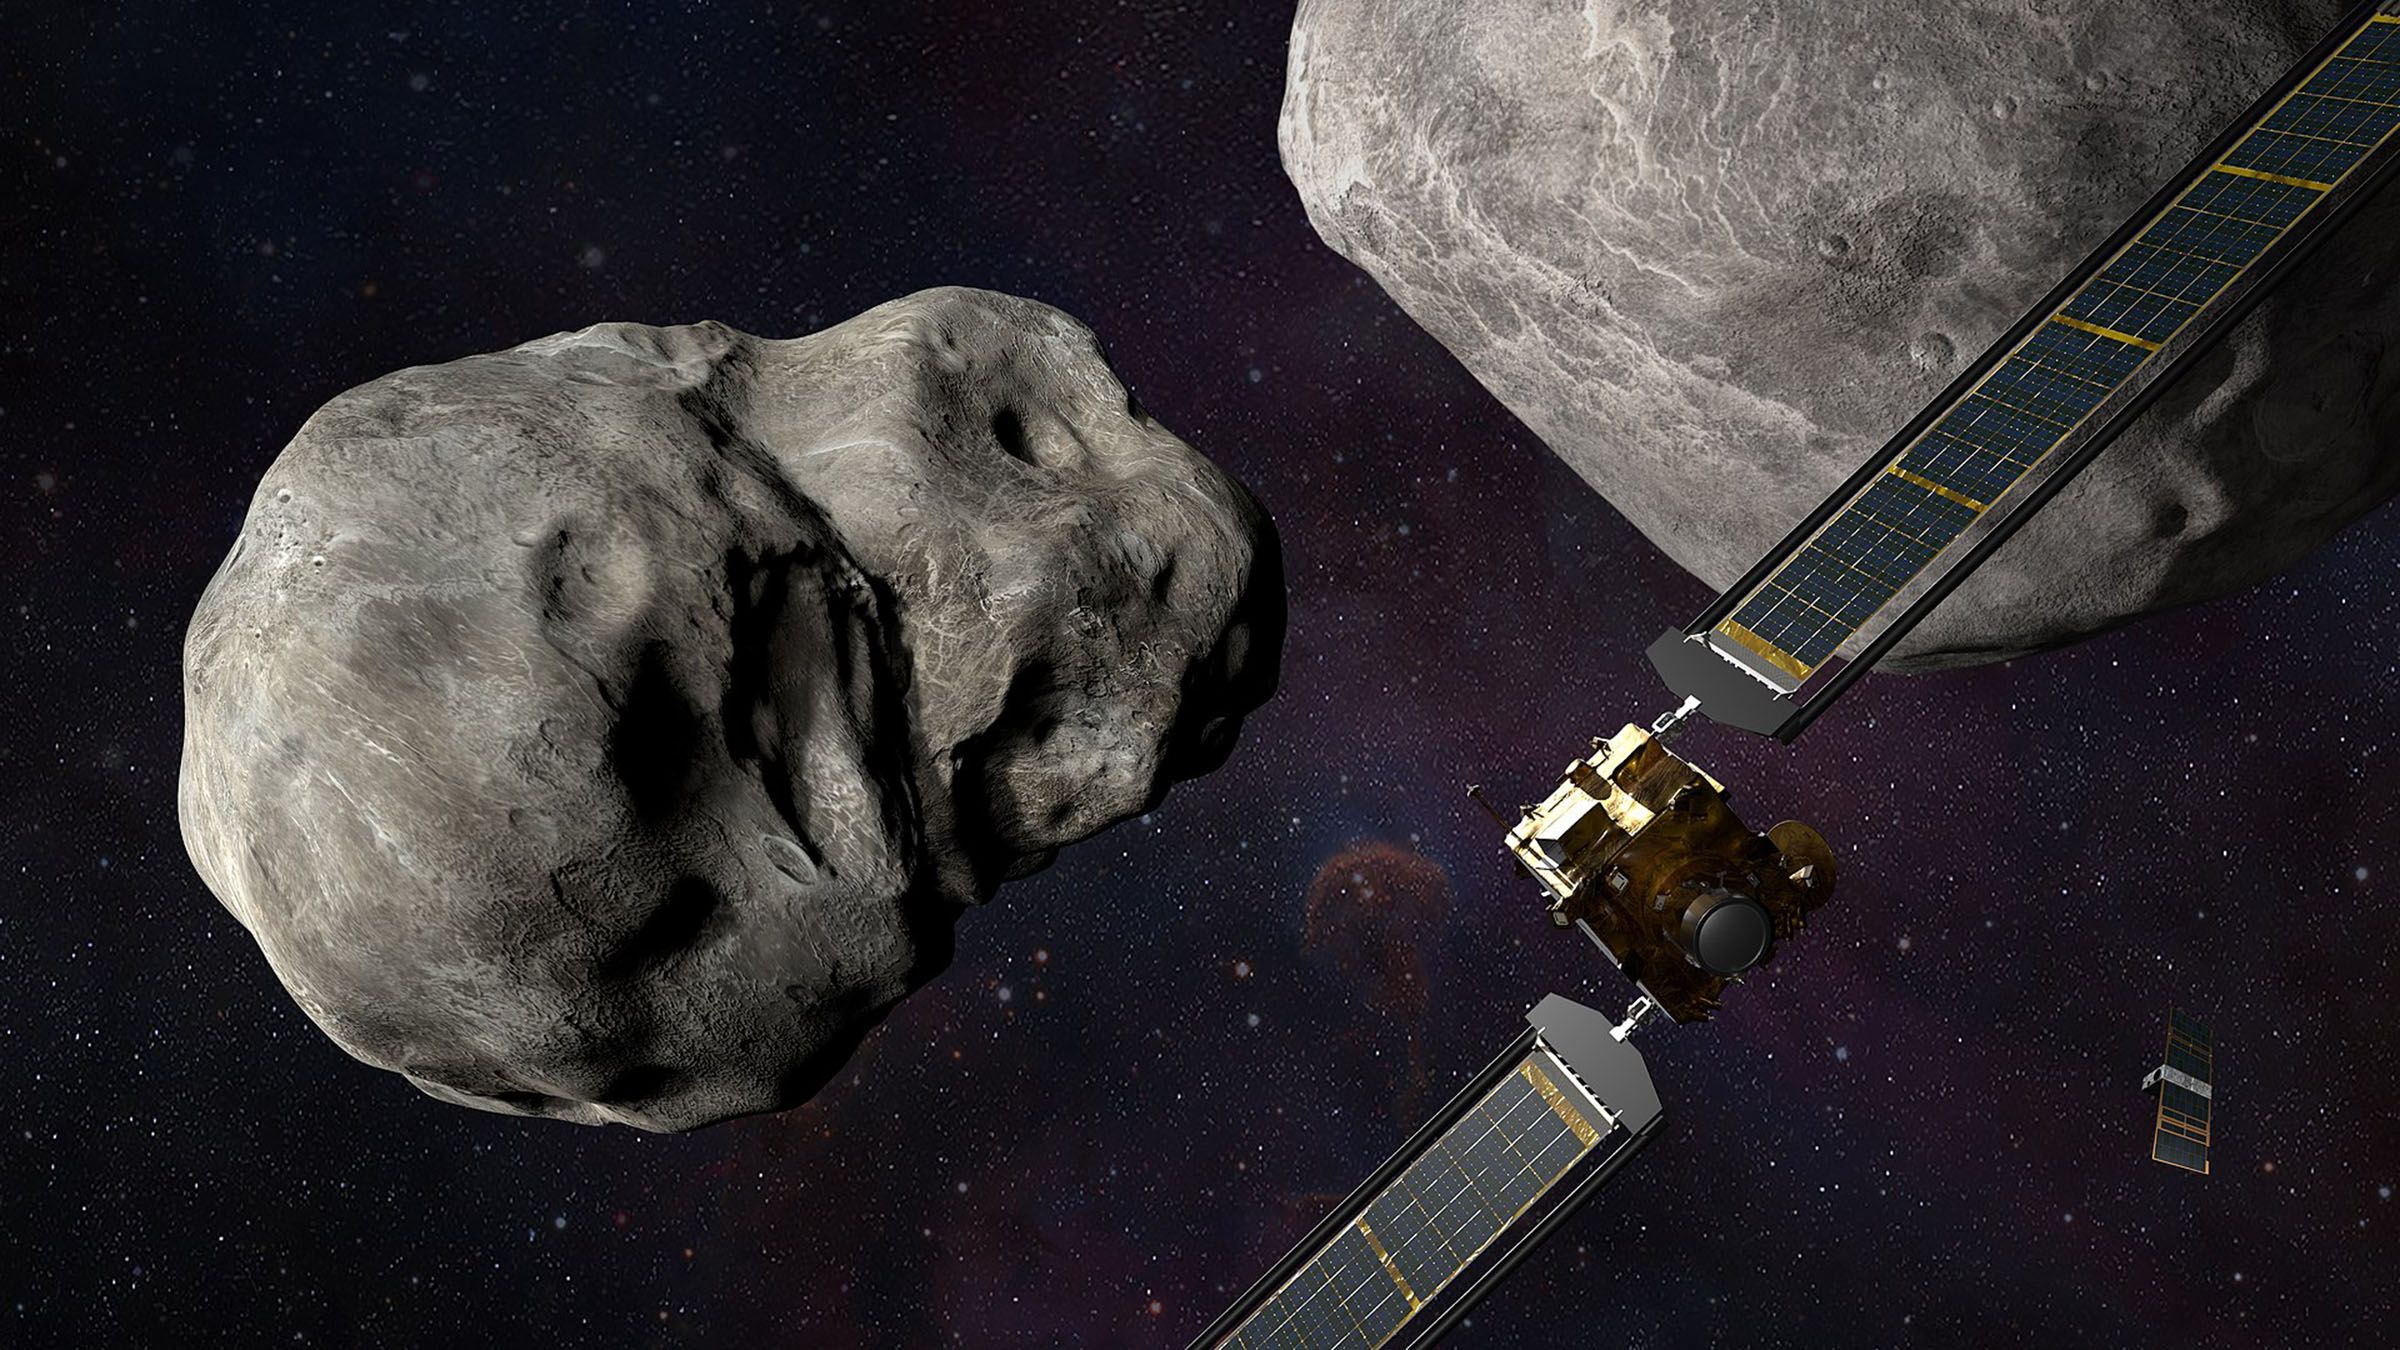 NASA to deflect an asteroid in test of planetary defense